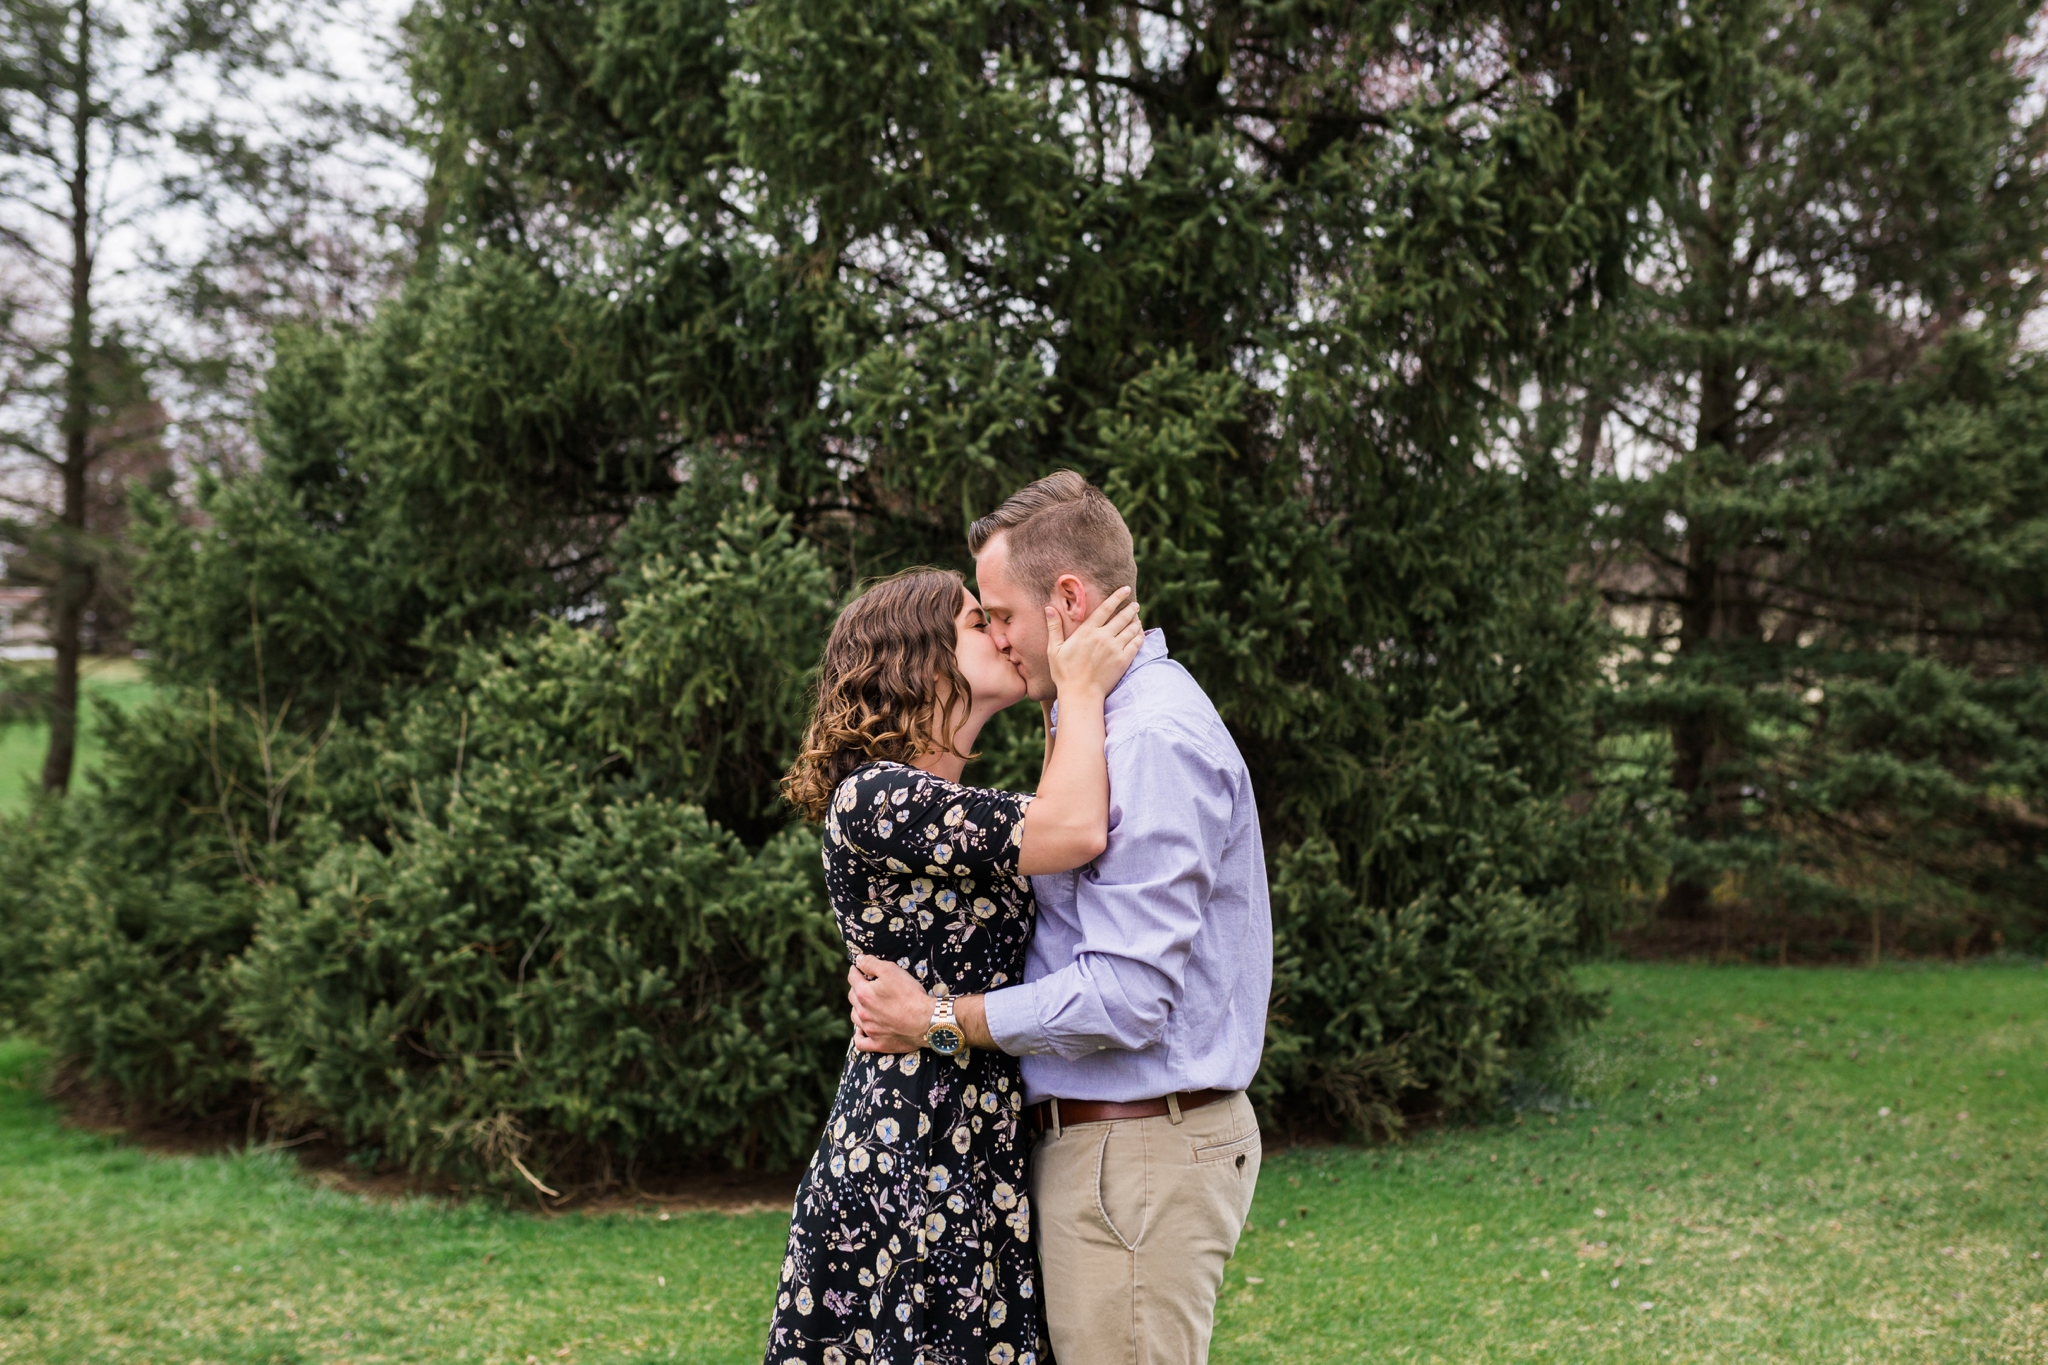 Emily Grace Photography, Lancaster PA Wedding Photographer, Photography for Joyful Couples, Greenfield Corporate Center Park Engagement Session